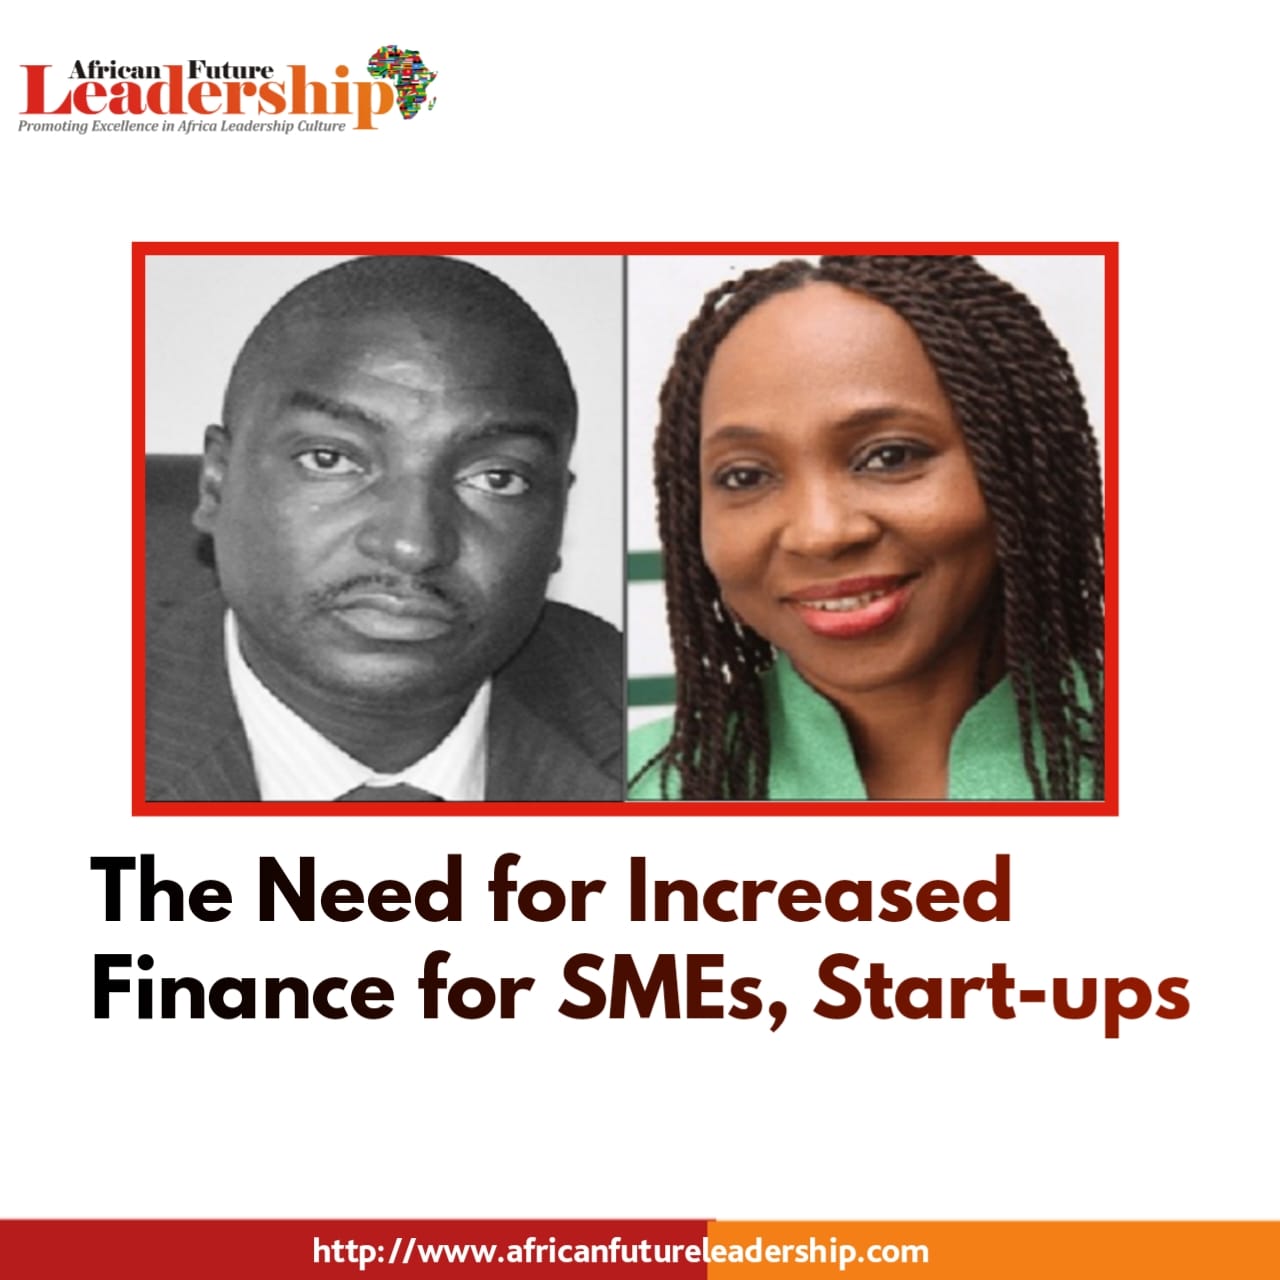 The Need for Increased Finance for SMEs, Start-ups